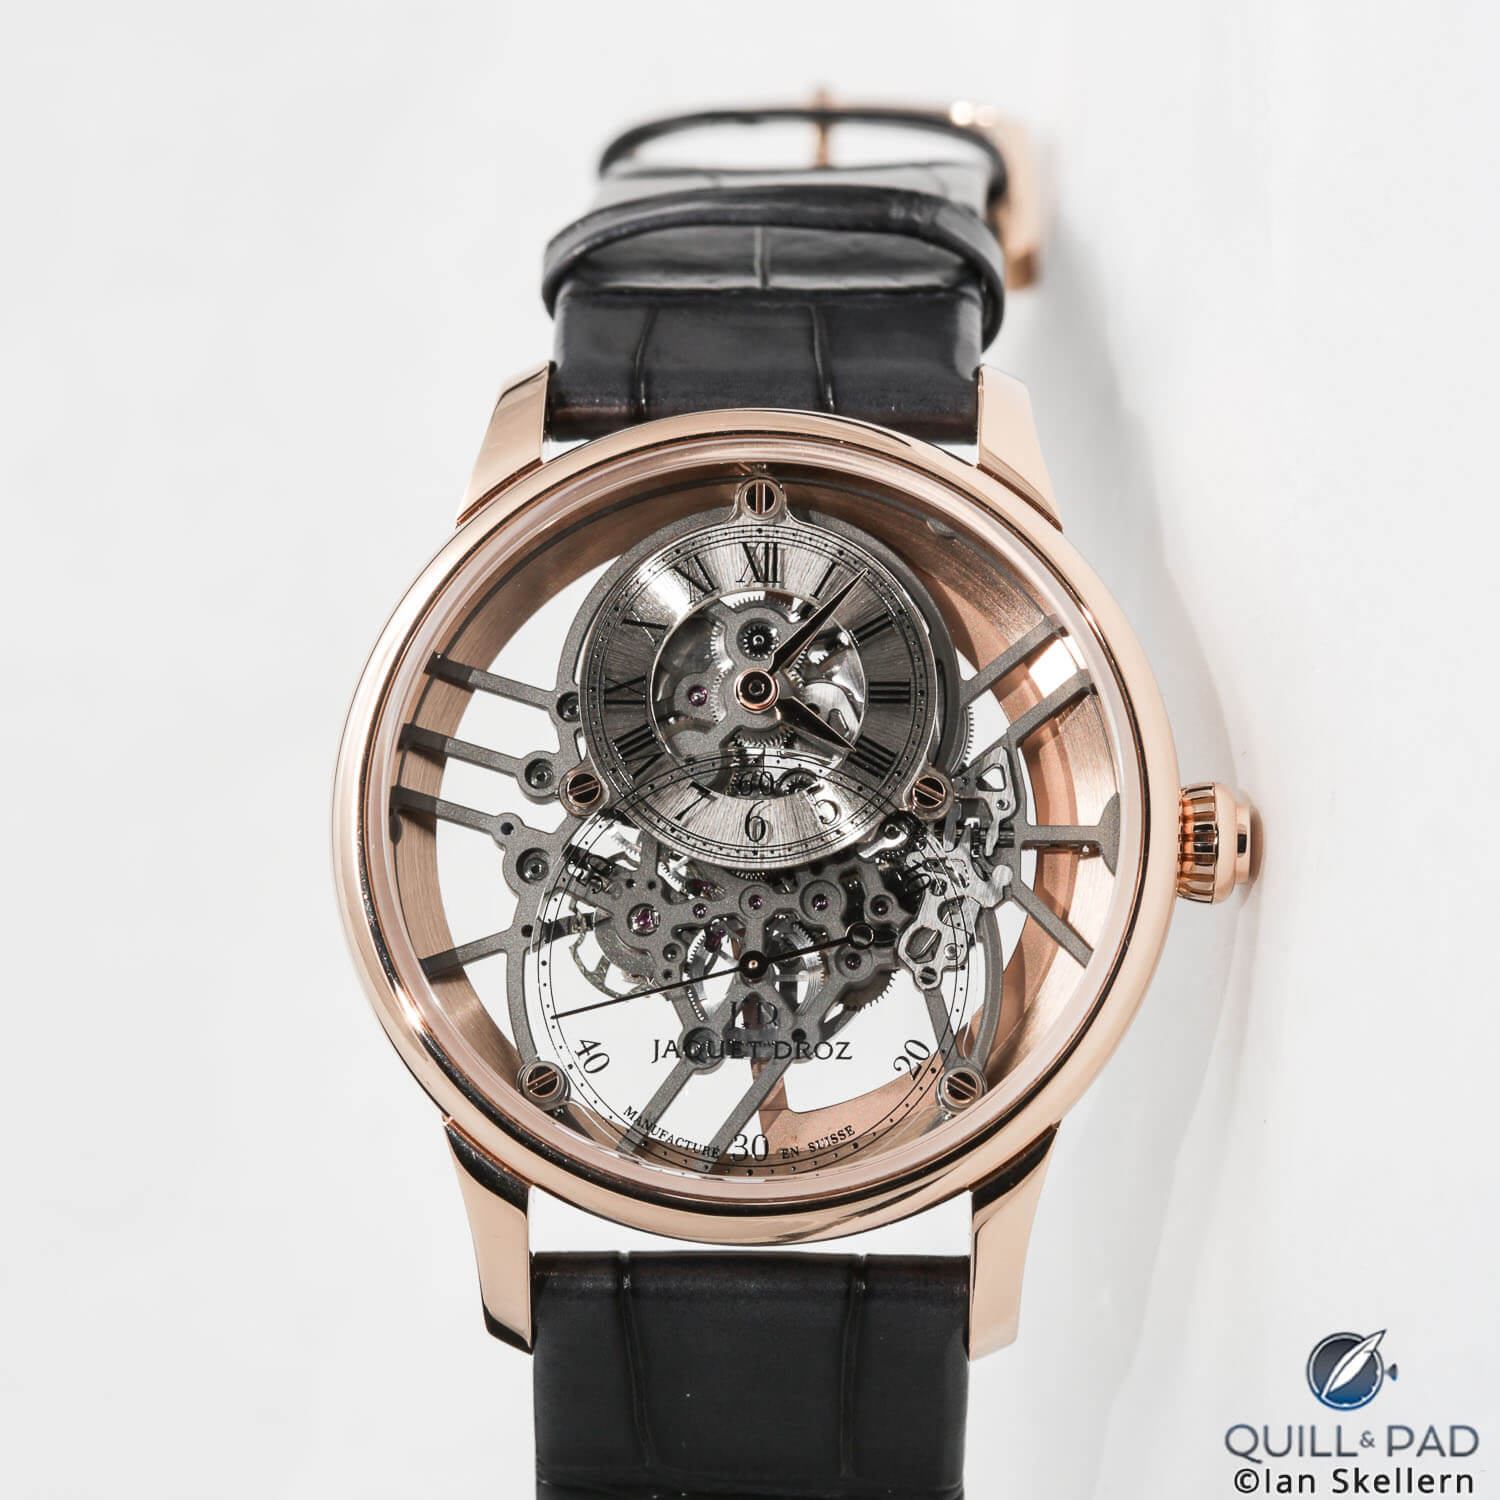 Jaquet Droz Grand Seconde Skelet-One in red gold